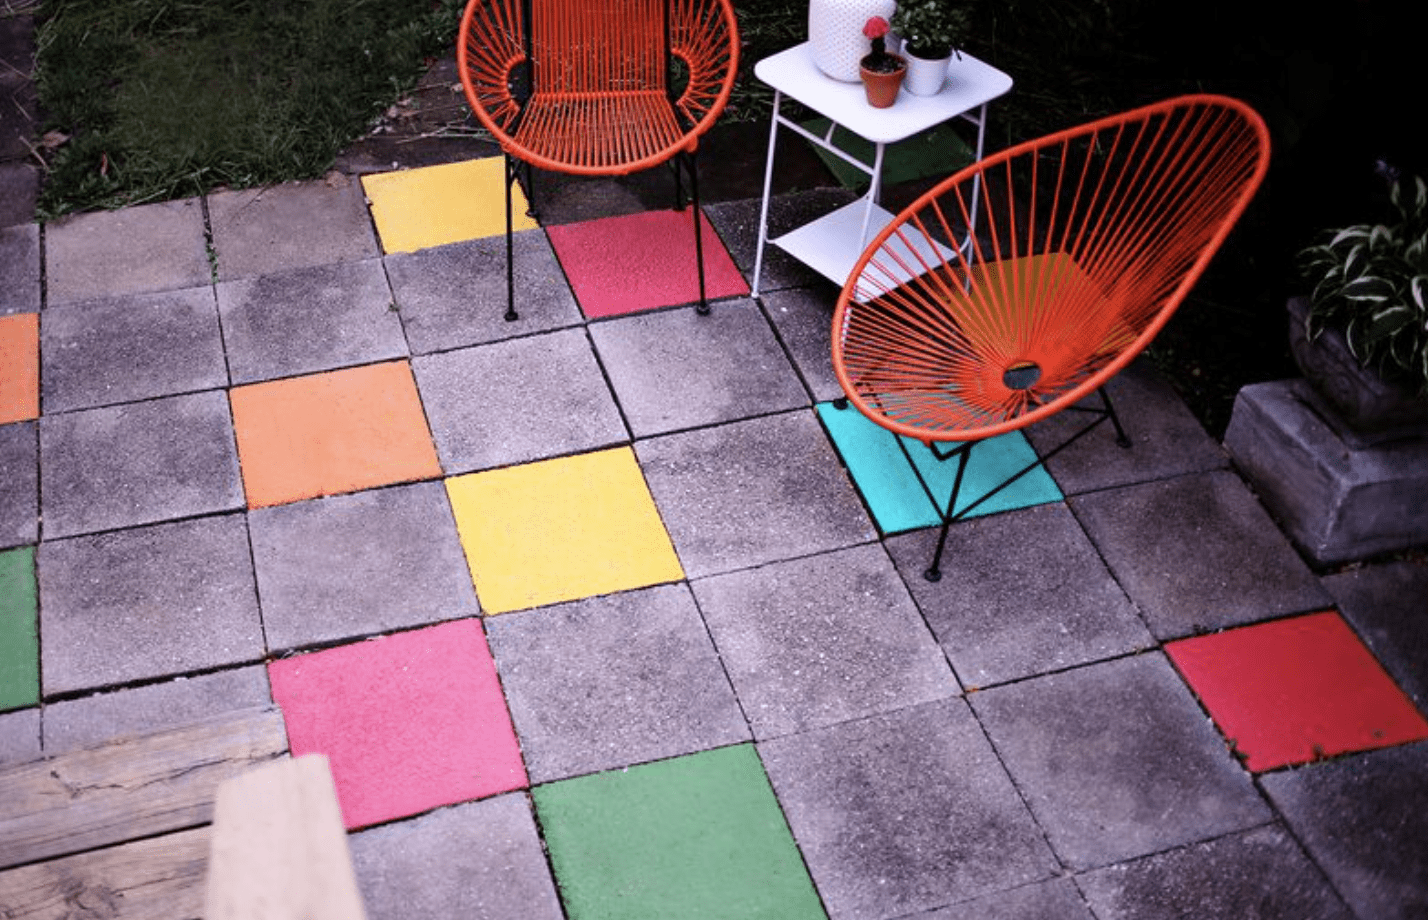 painted patio paver stones with two red chairs